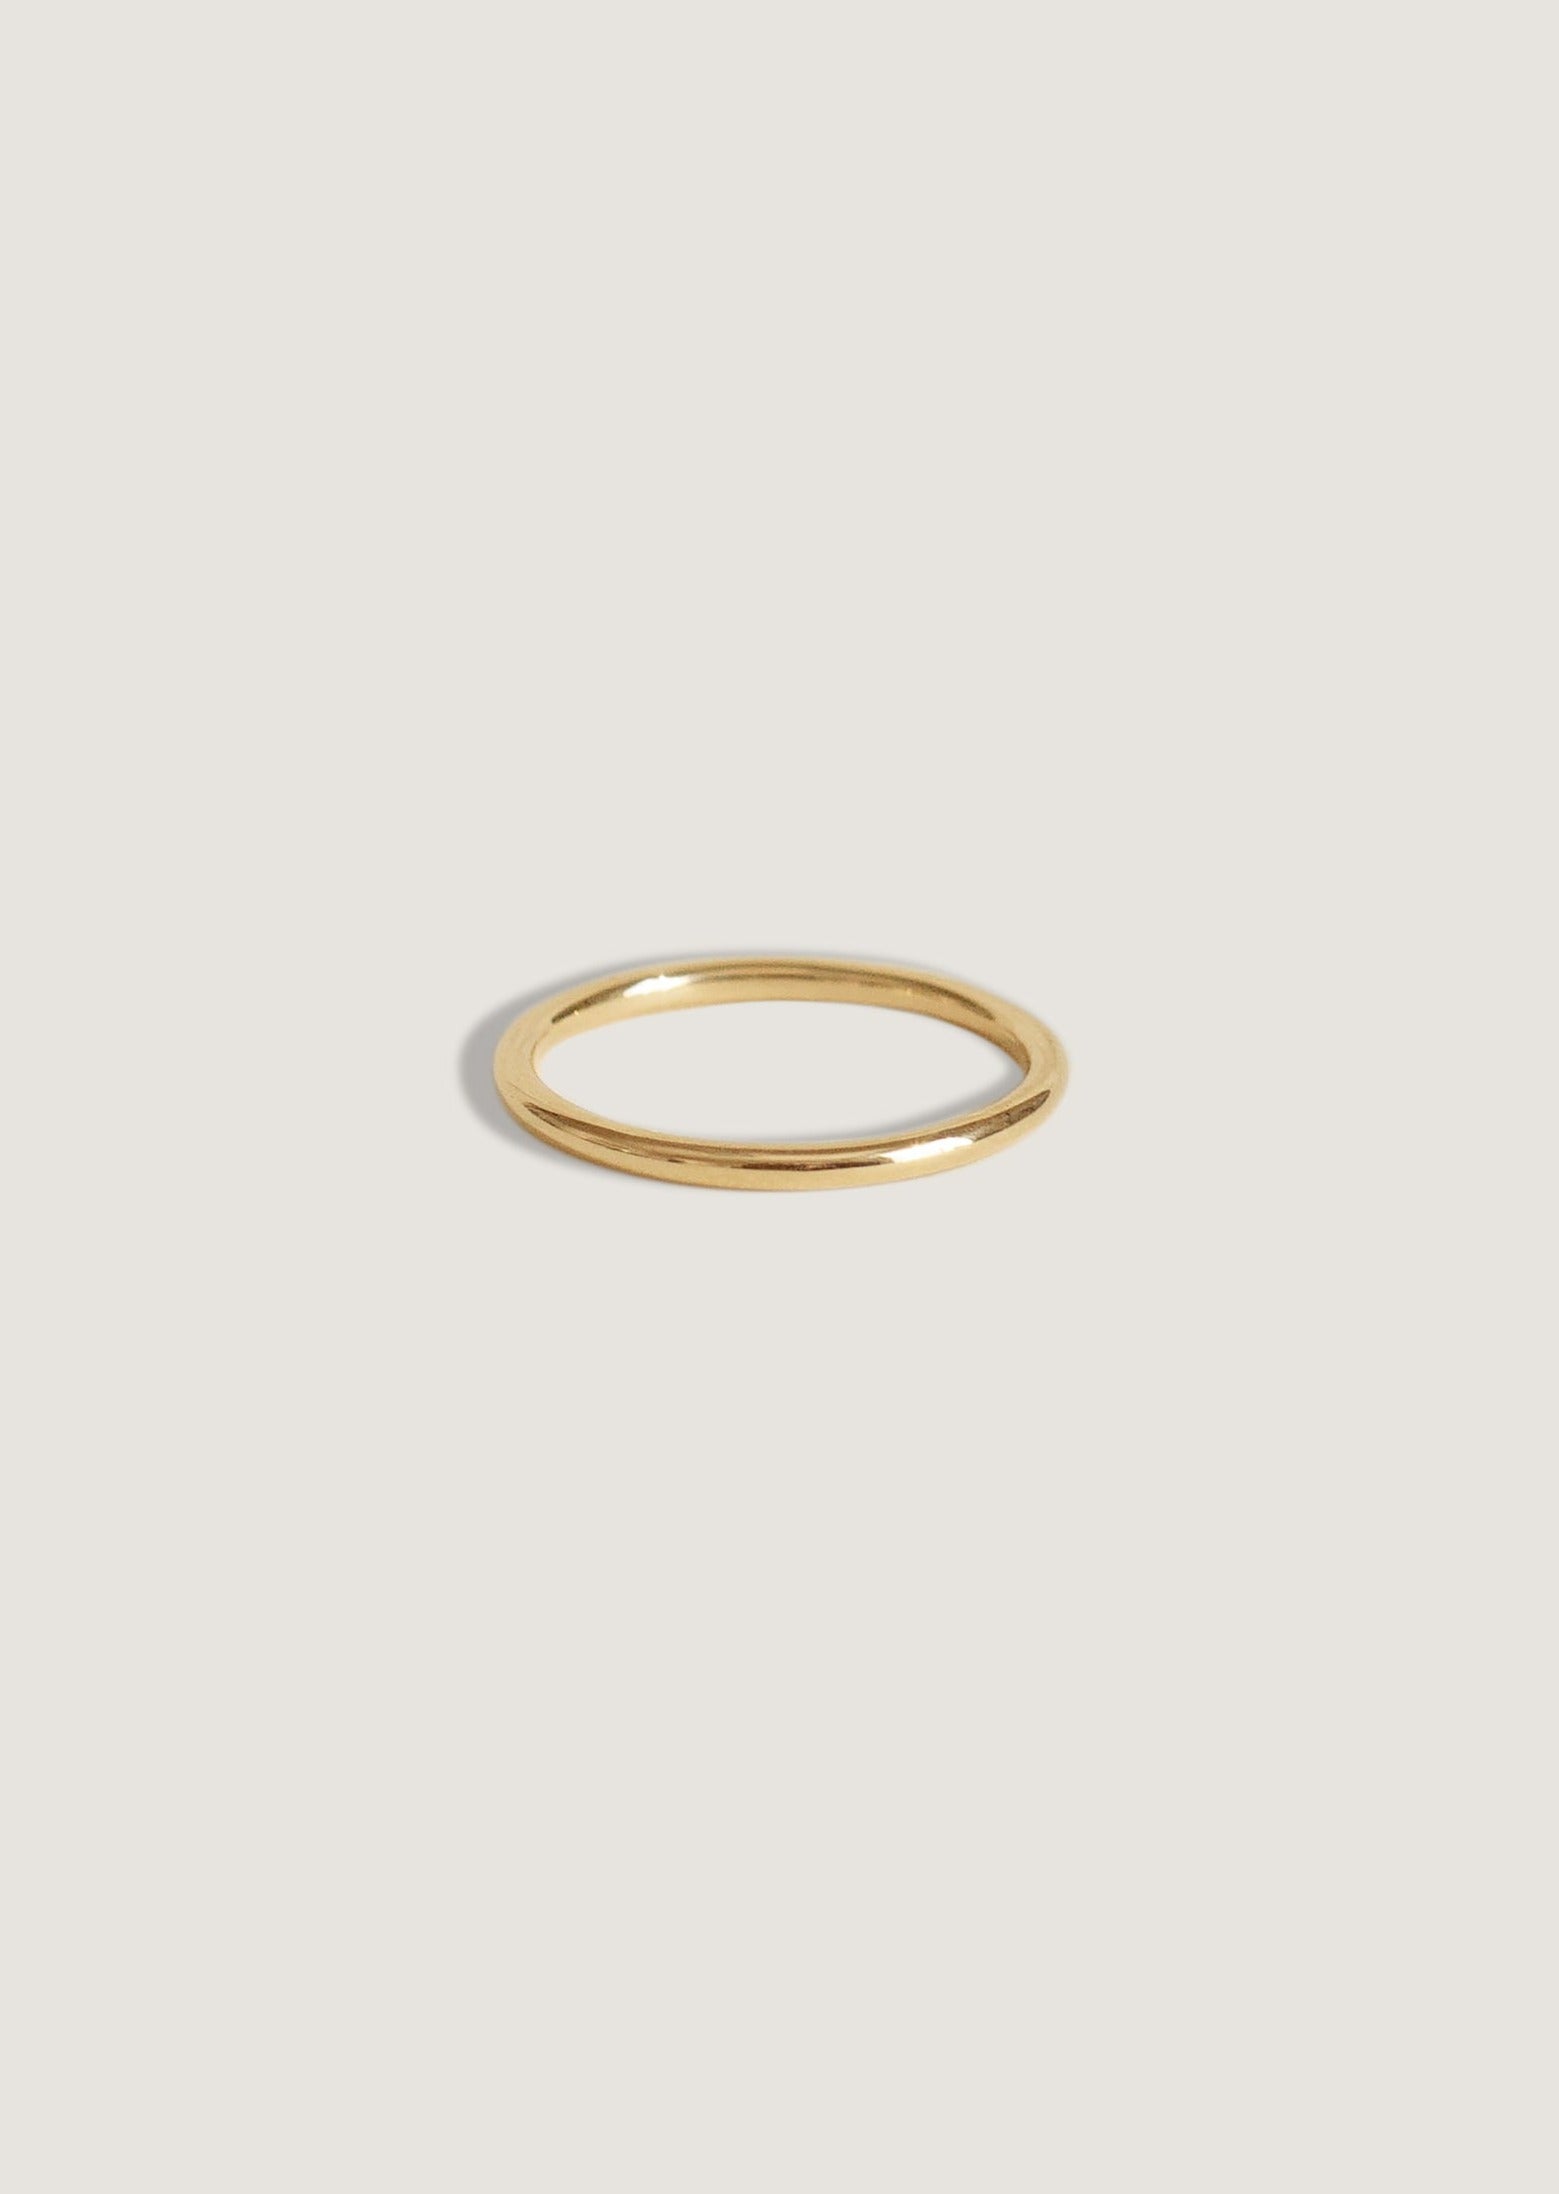 alt="Barely There Stacking Ring II"